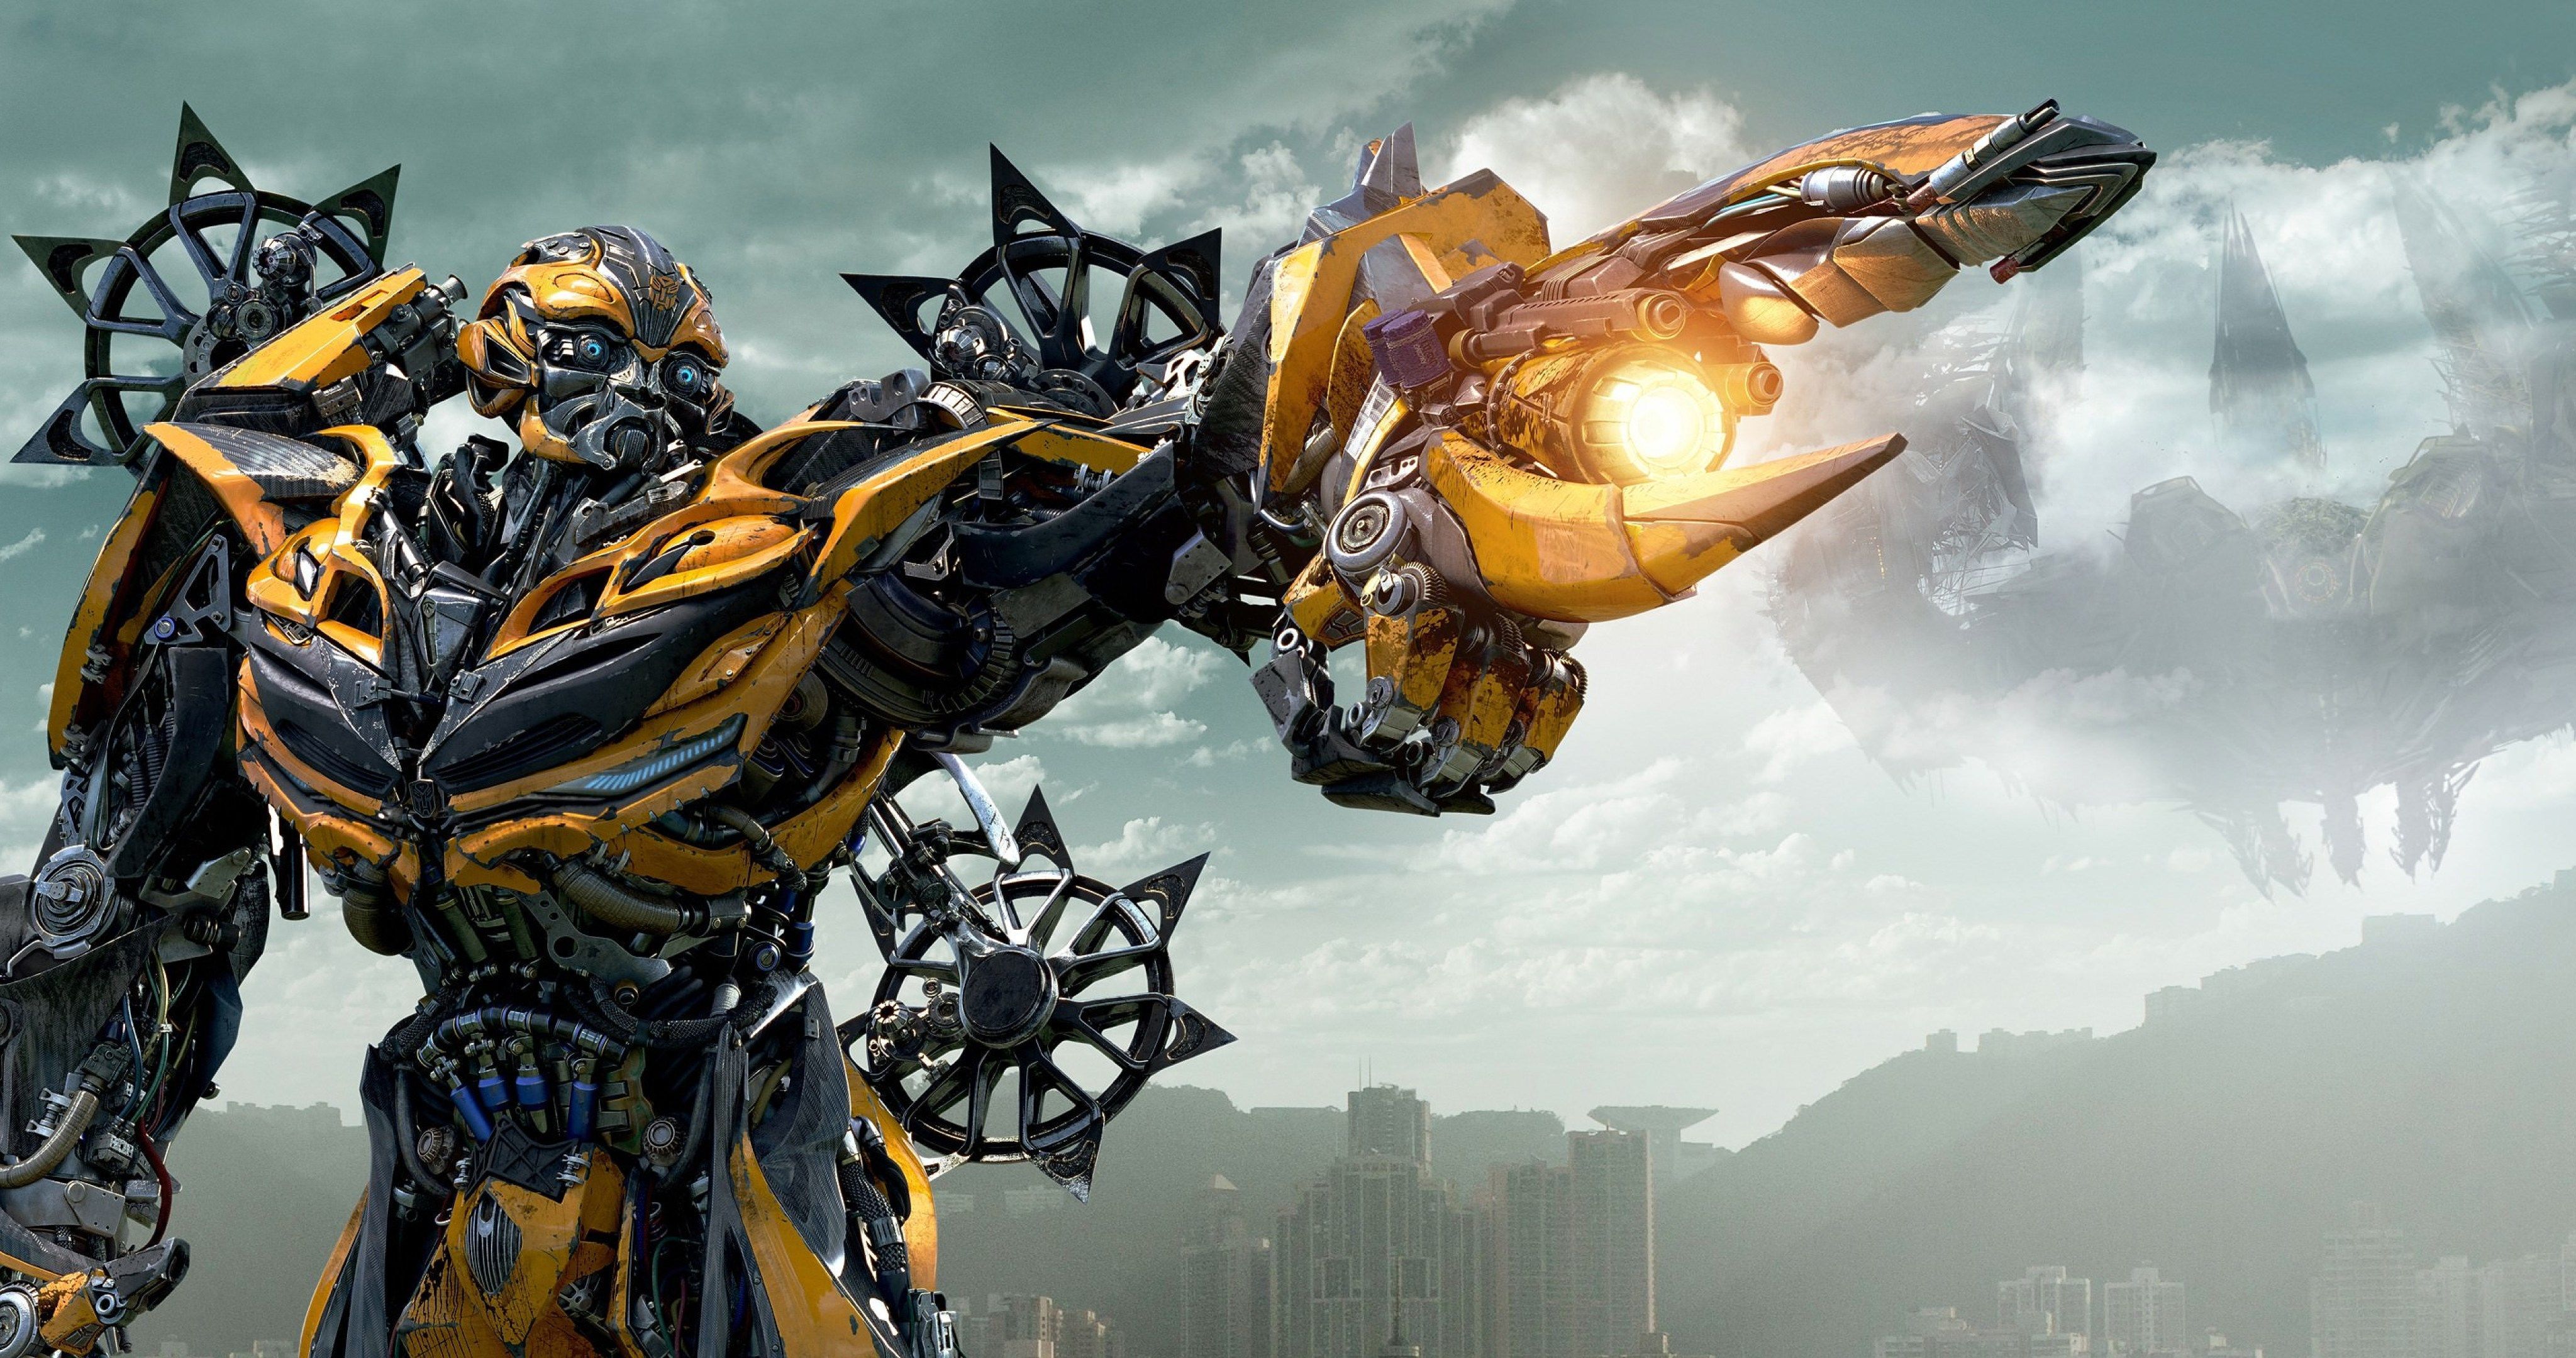 transformers age of extinction 4k ultra HD wallpaper. Transformers age, Transformers age of extinction, Transformers